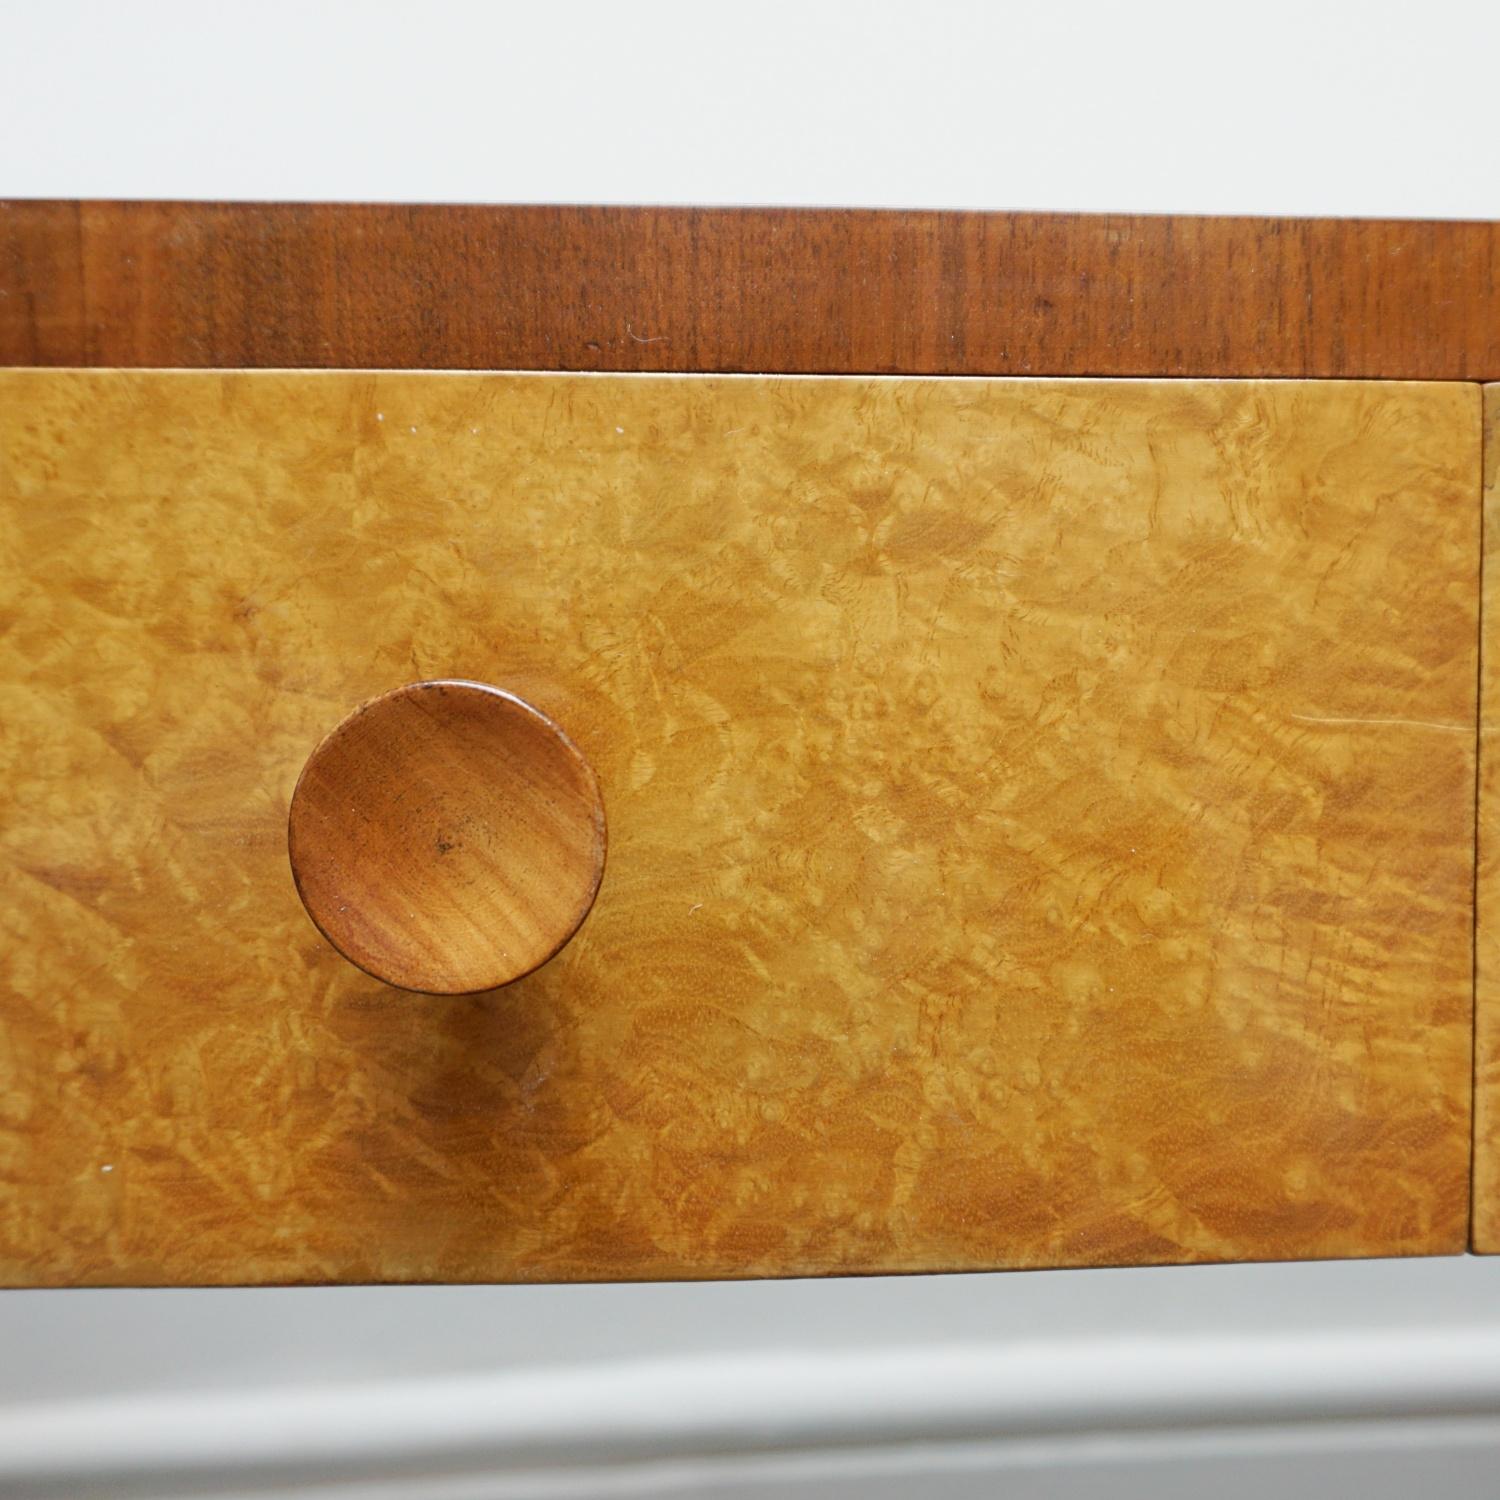 Original Art Deco Sideboard/Console Table in Burr and Figured Walnut In Good Condition For Sale In Forest Row, East Sussex